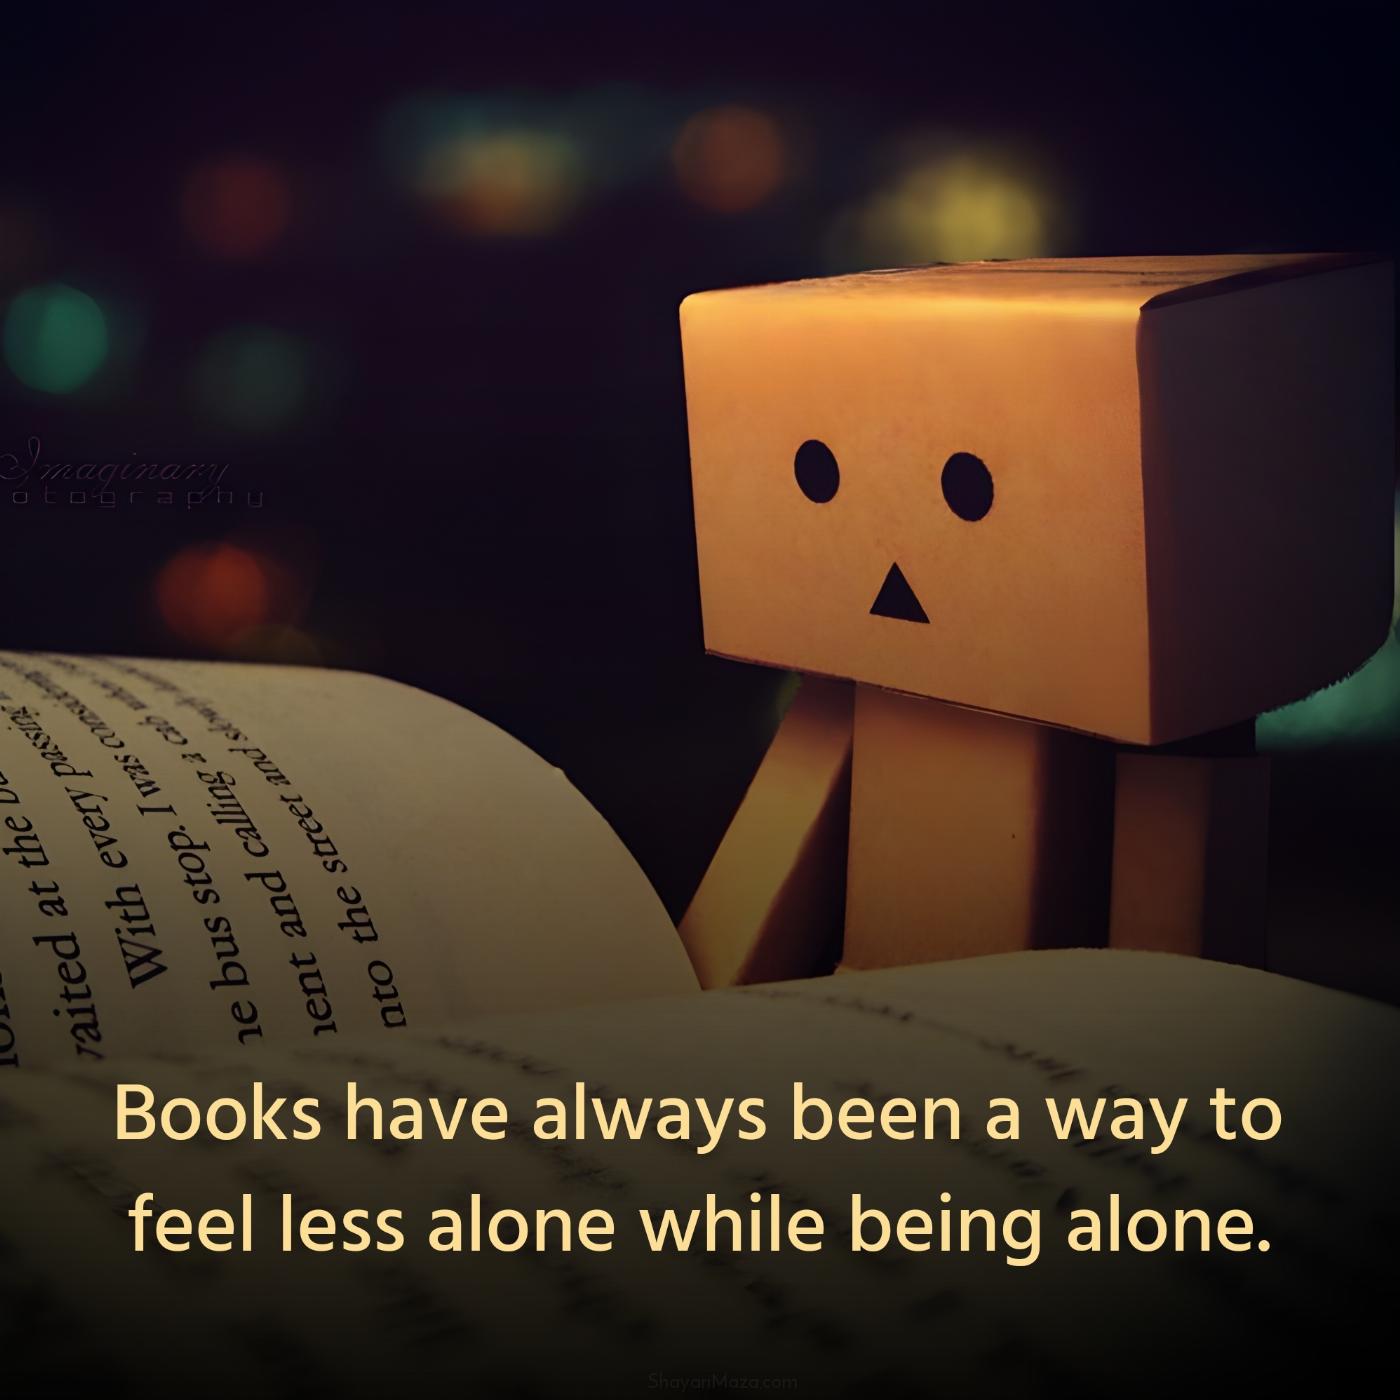 Books have always been a way to feel less alone while being alone